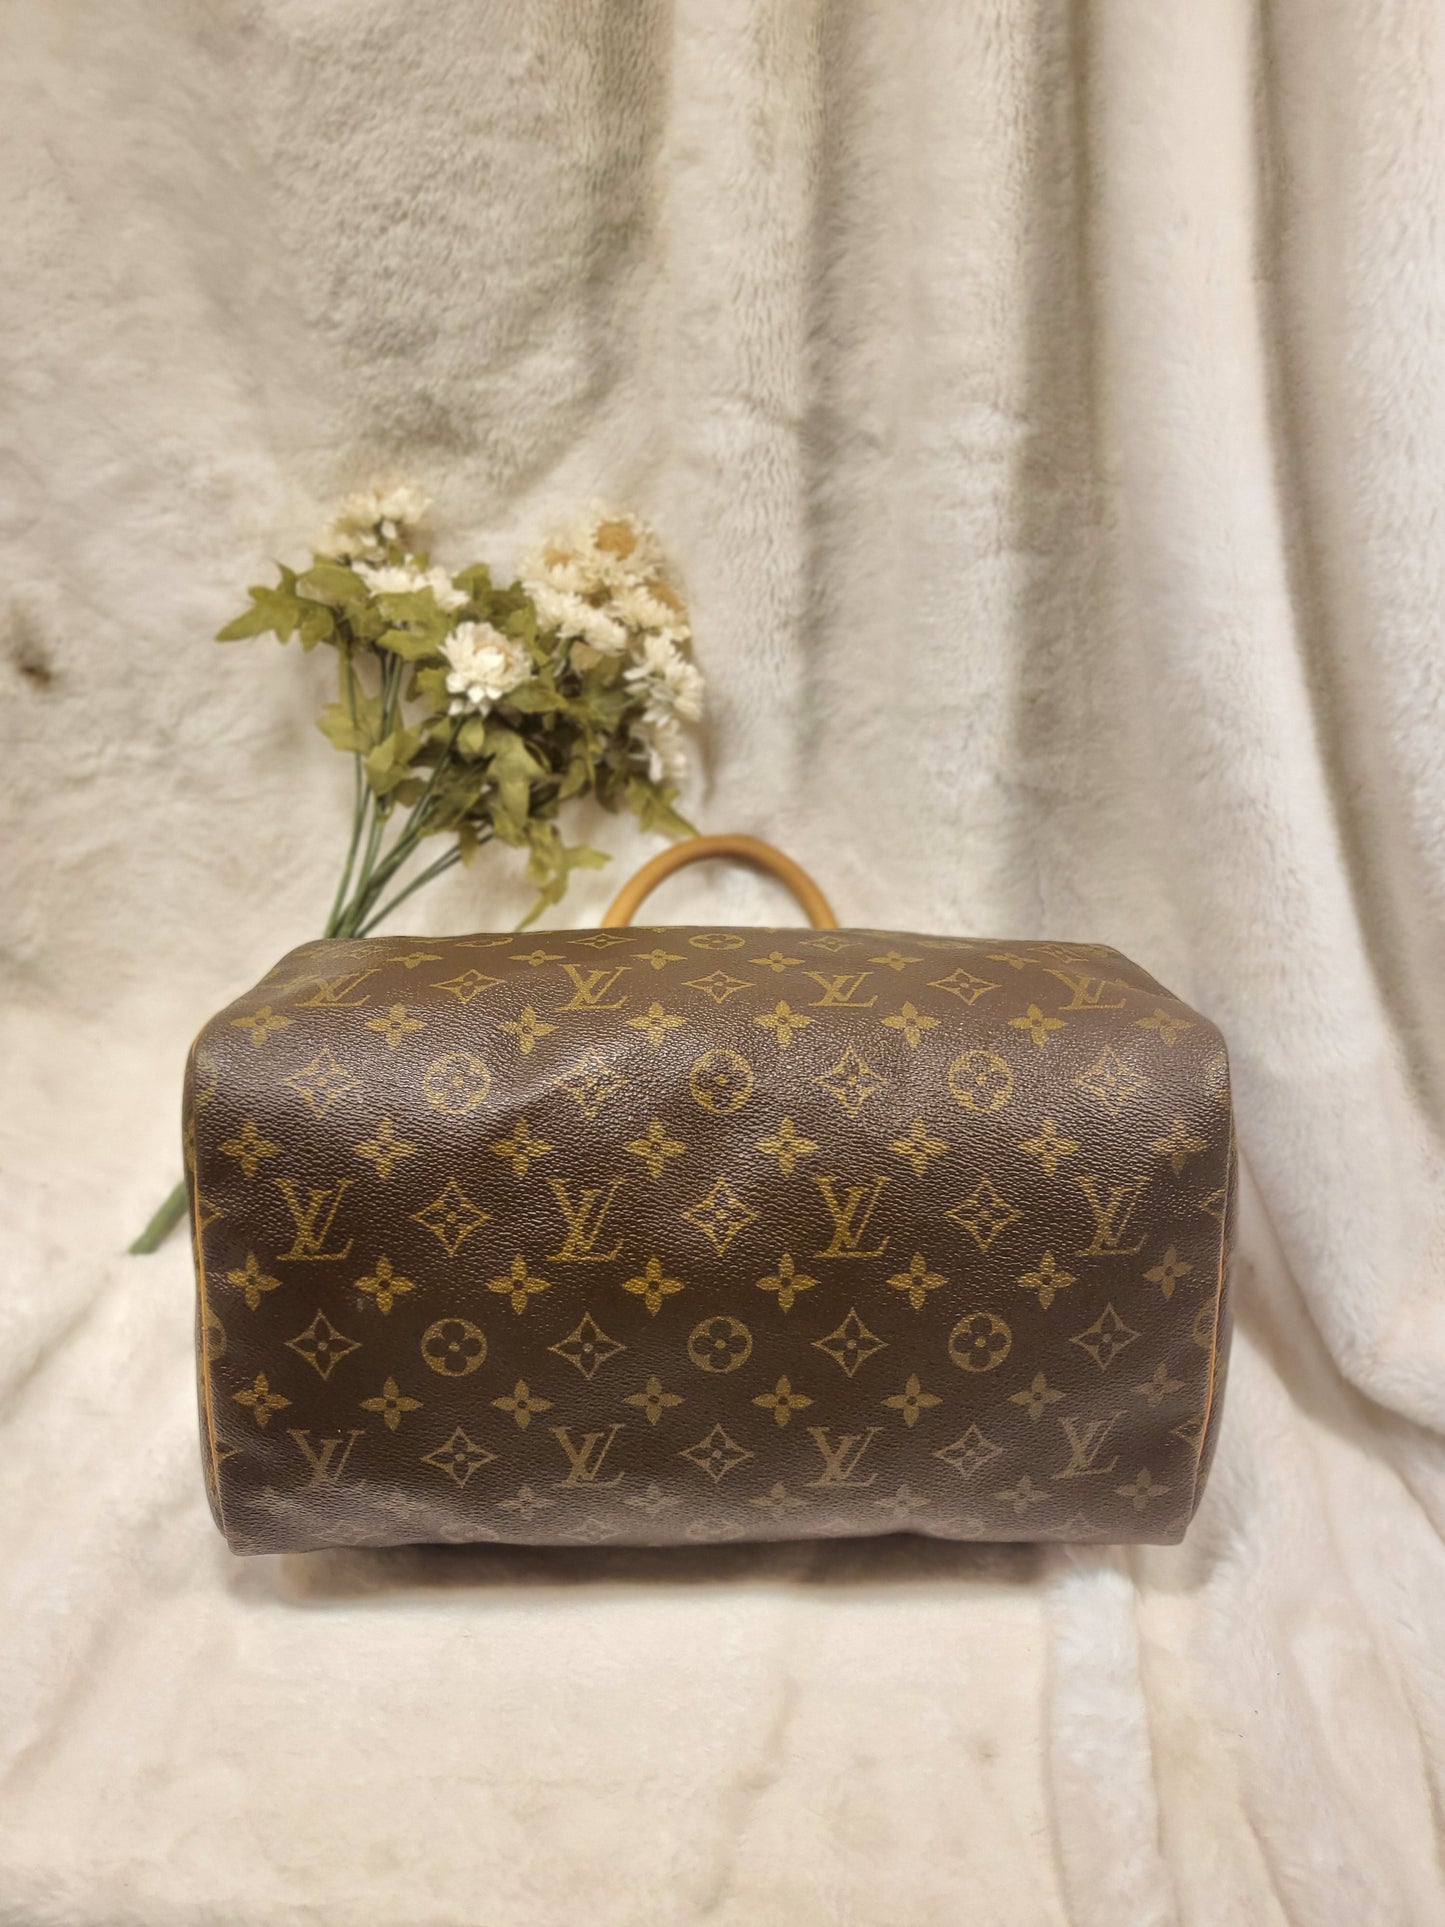 Authentic pre-owned Louis Vuitton Speedy 30